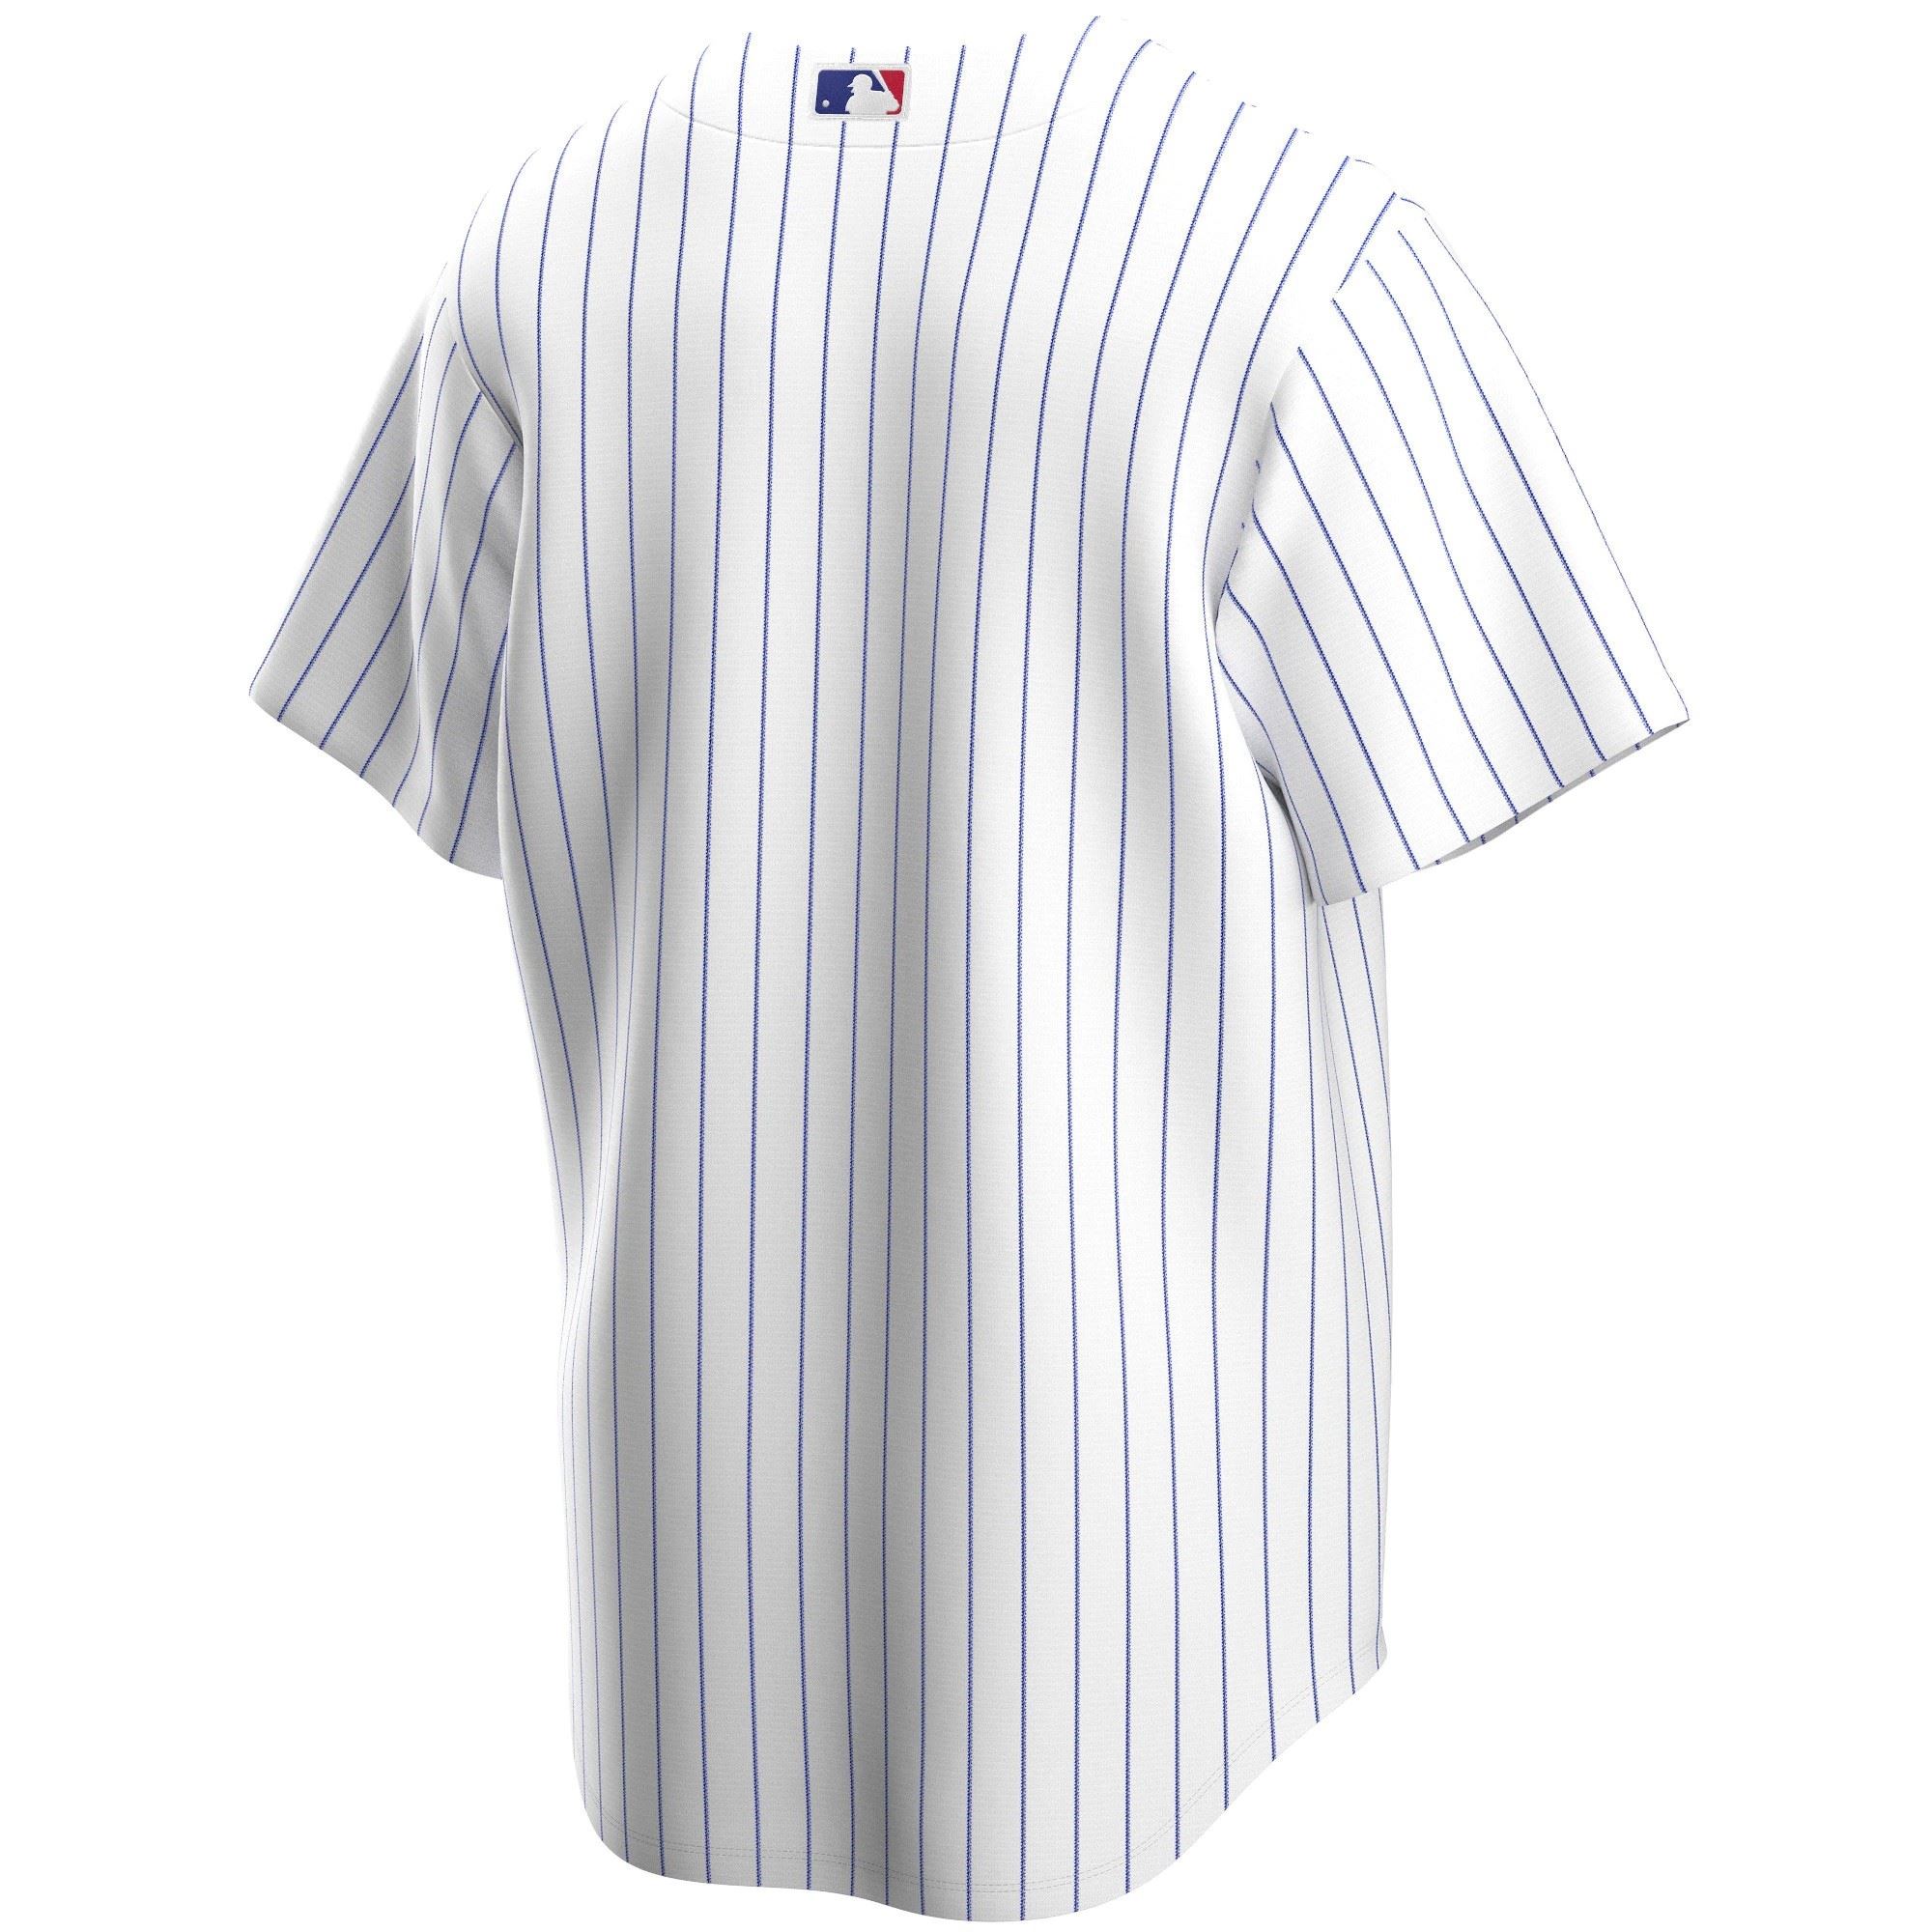 Chicago Cubs Official MLB Replica Home Jersey White Nike